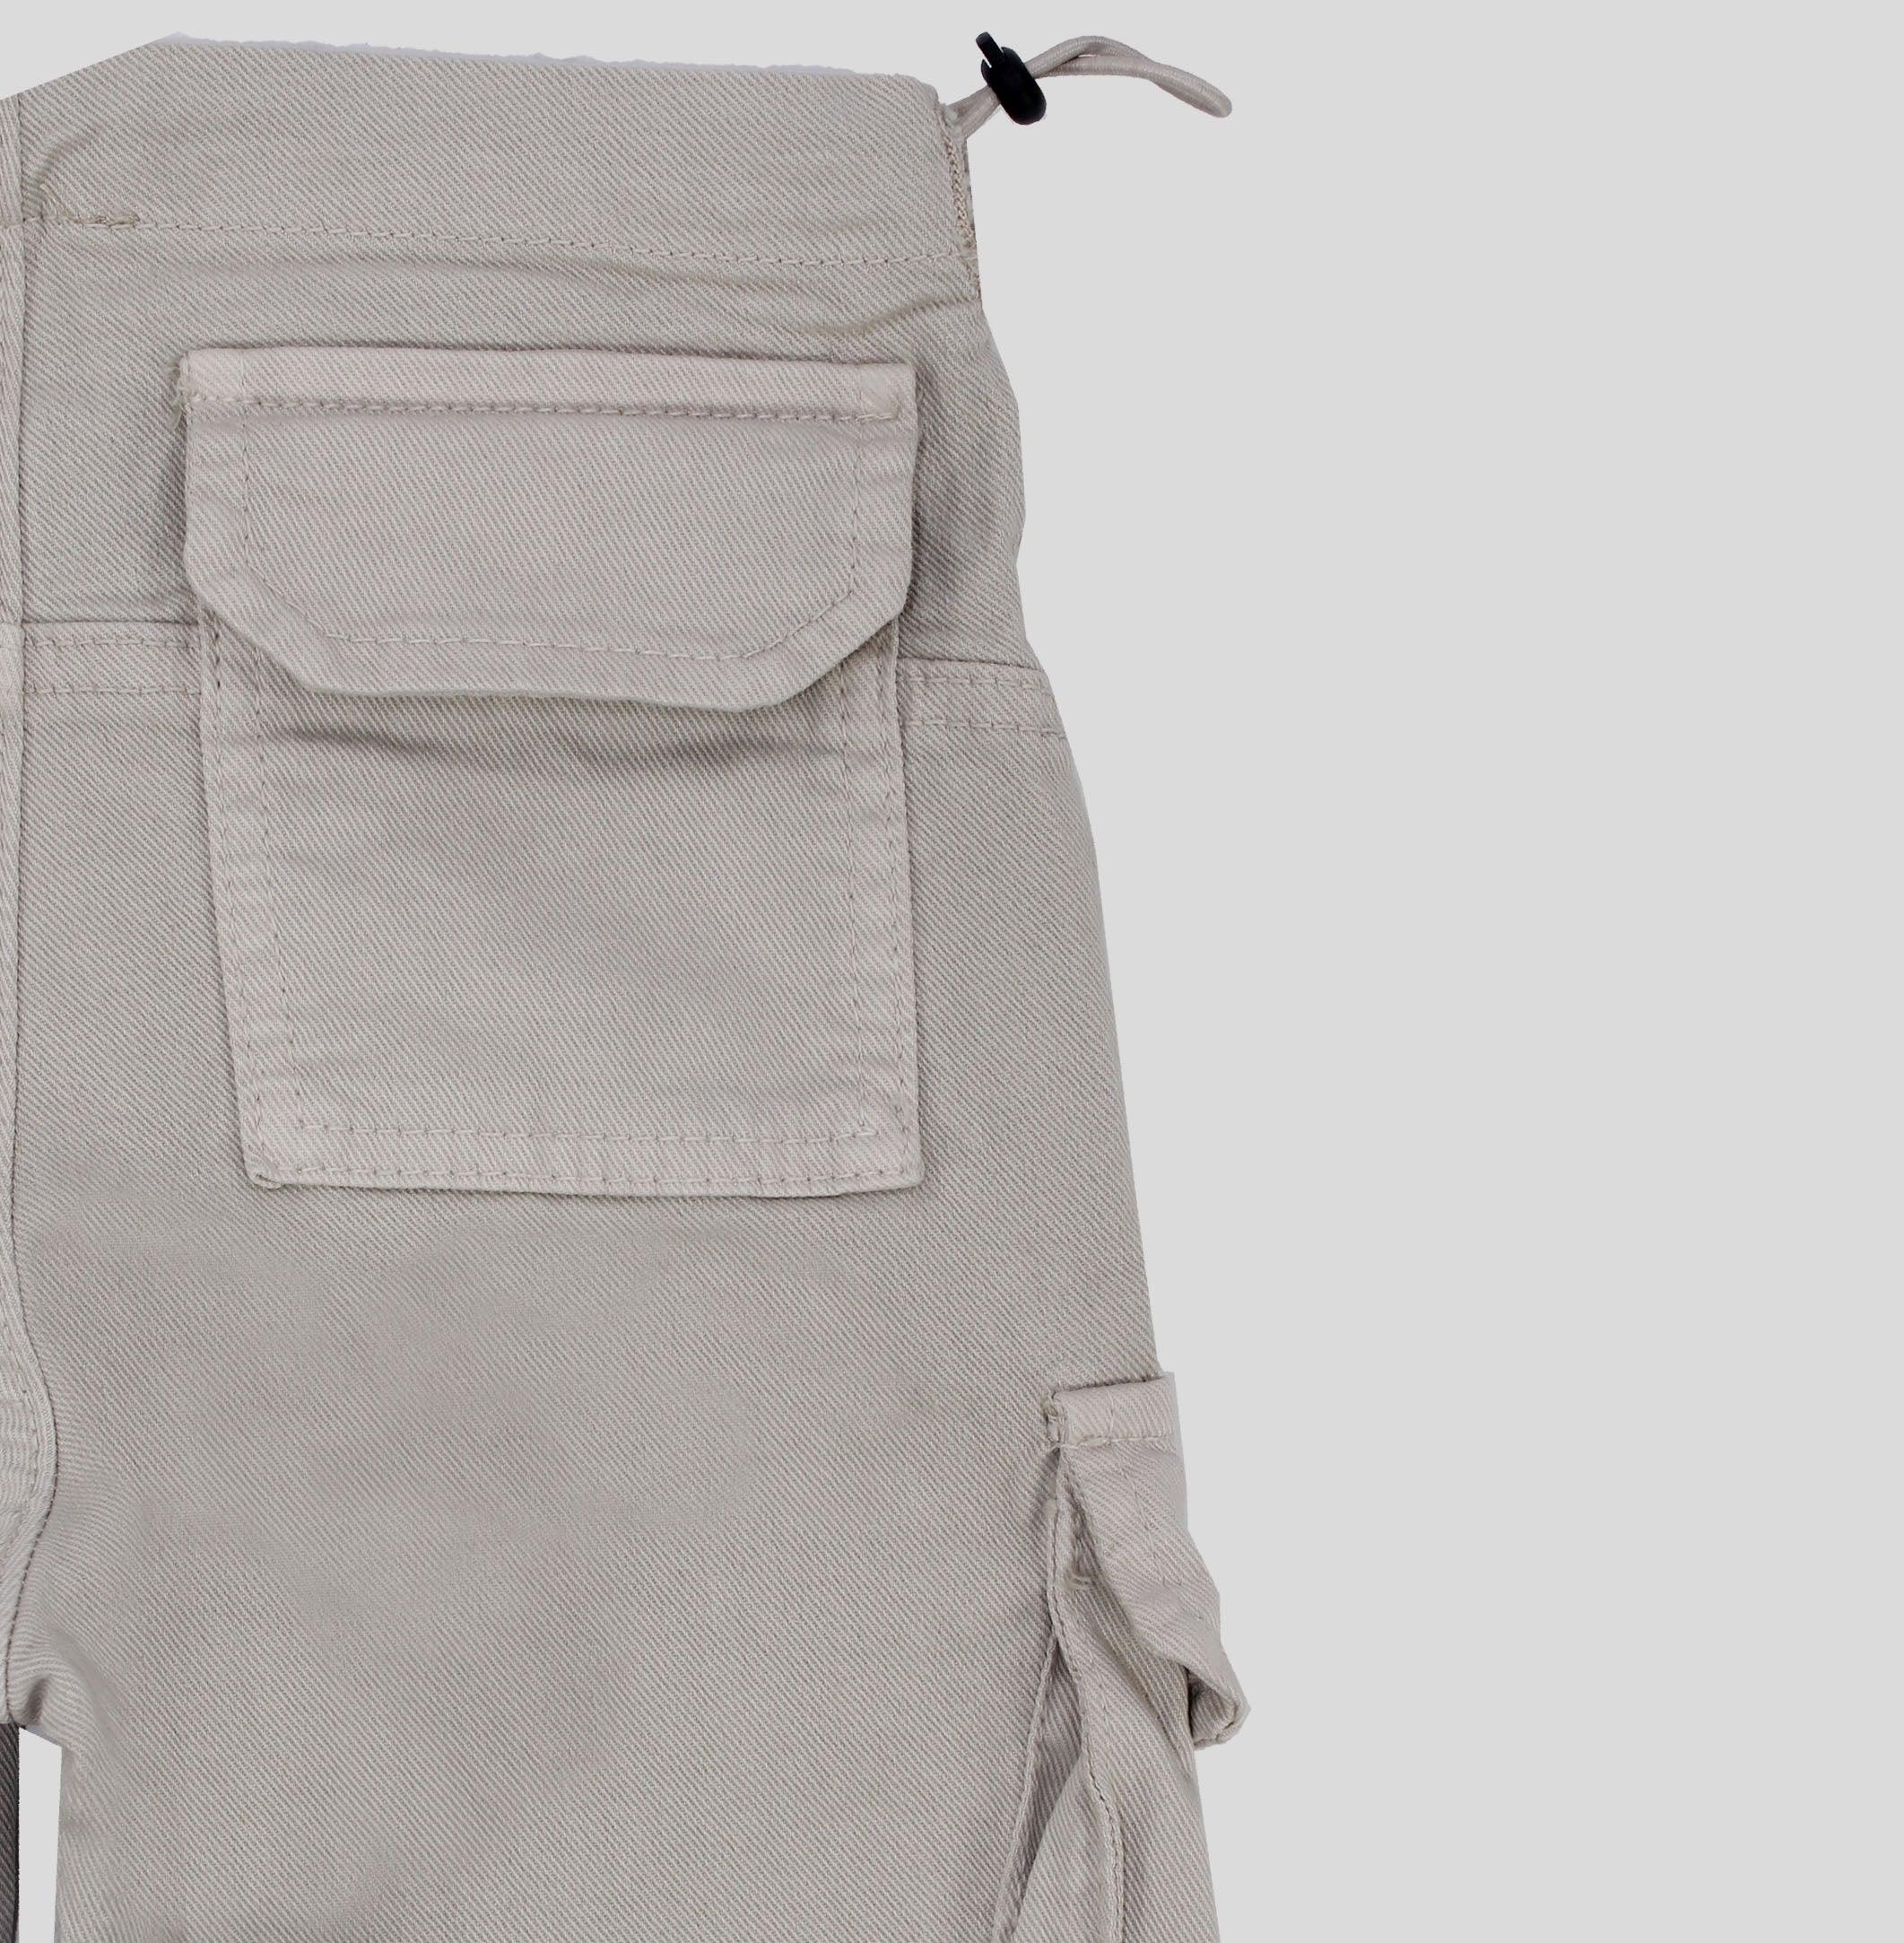 Beige Parachute Cargo Pants - Ourkids - Playmore